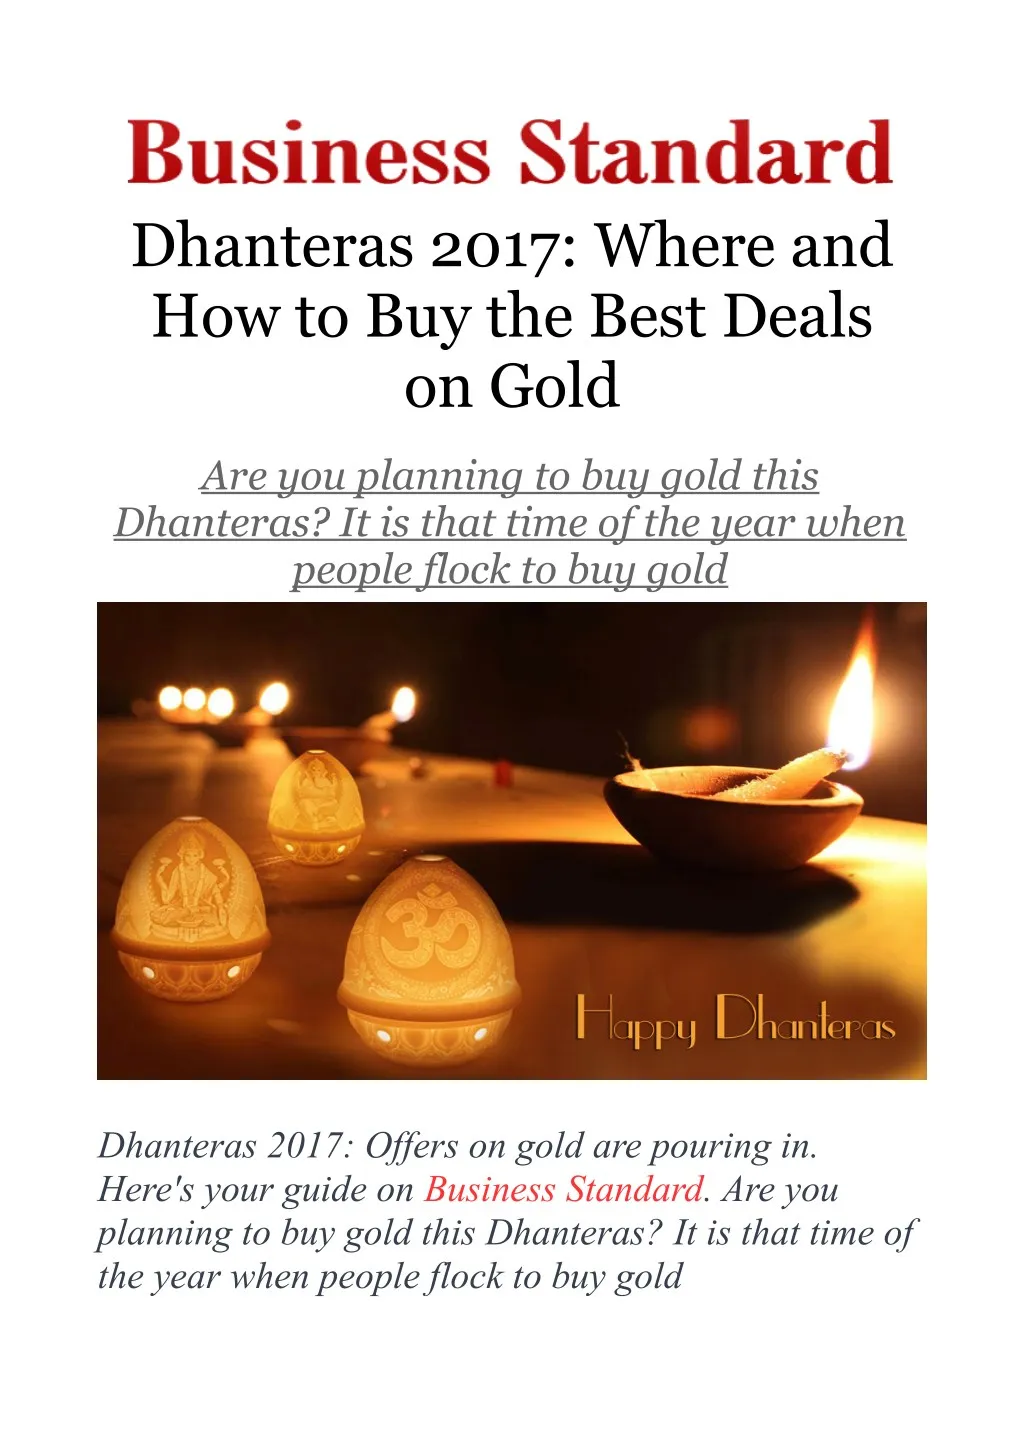 dhanteras 2017 where and how to buy the best